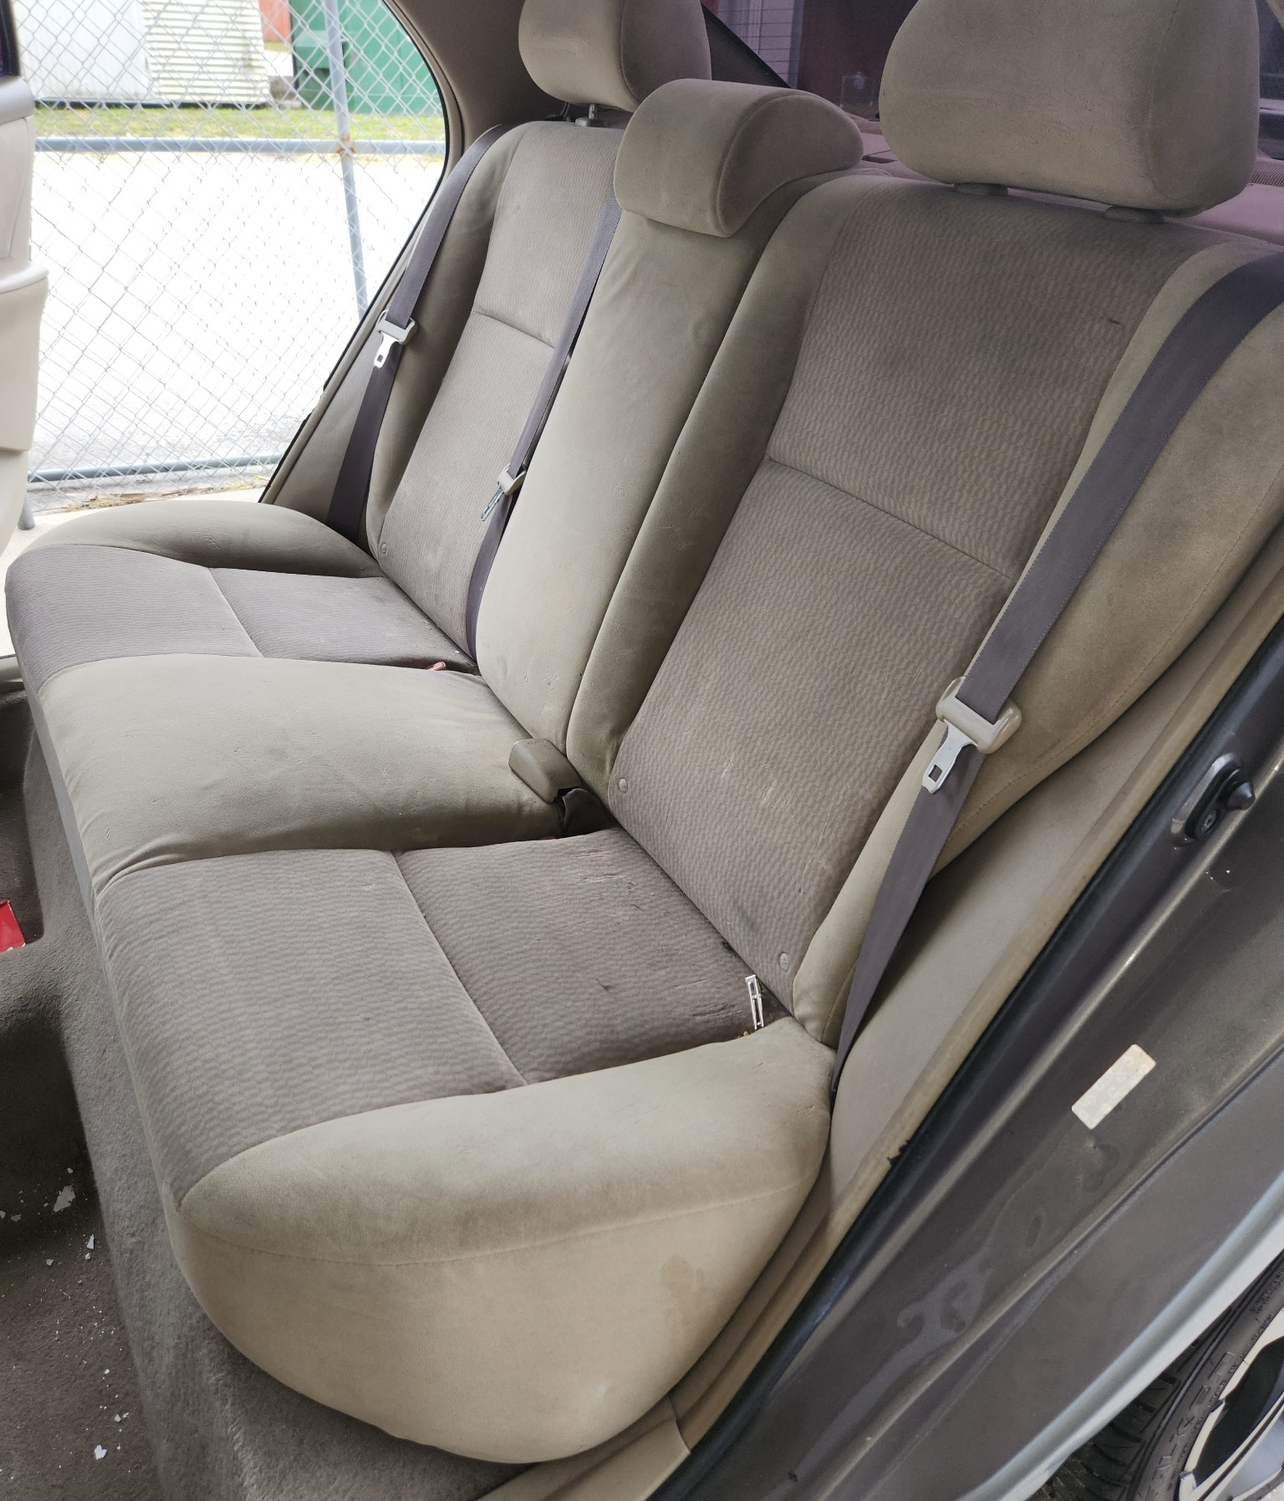 Back Tan Seats Before - Melbourne, FL -A & E Auto and Boat Upholstery